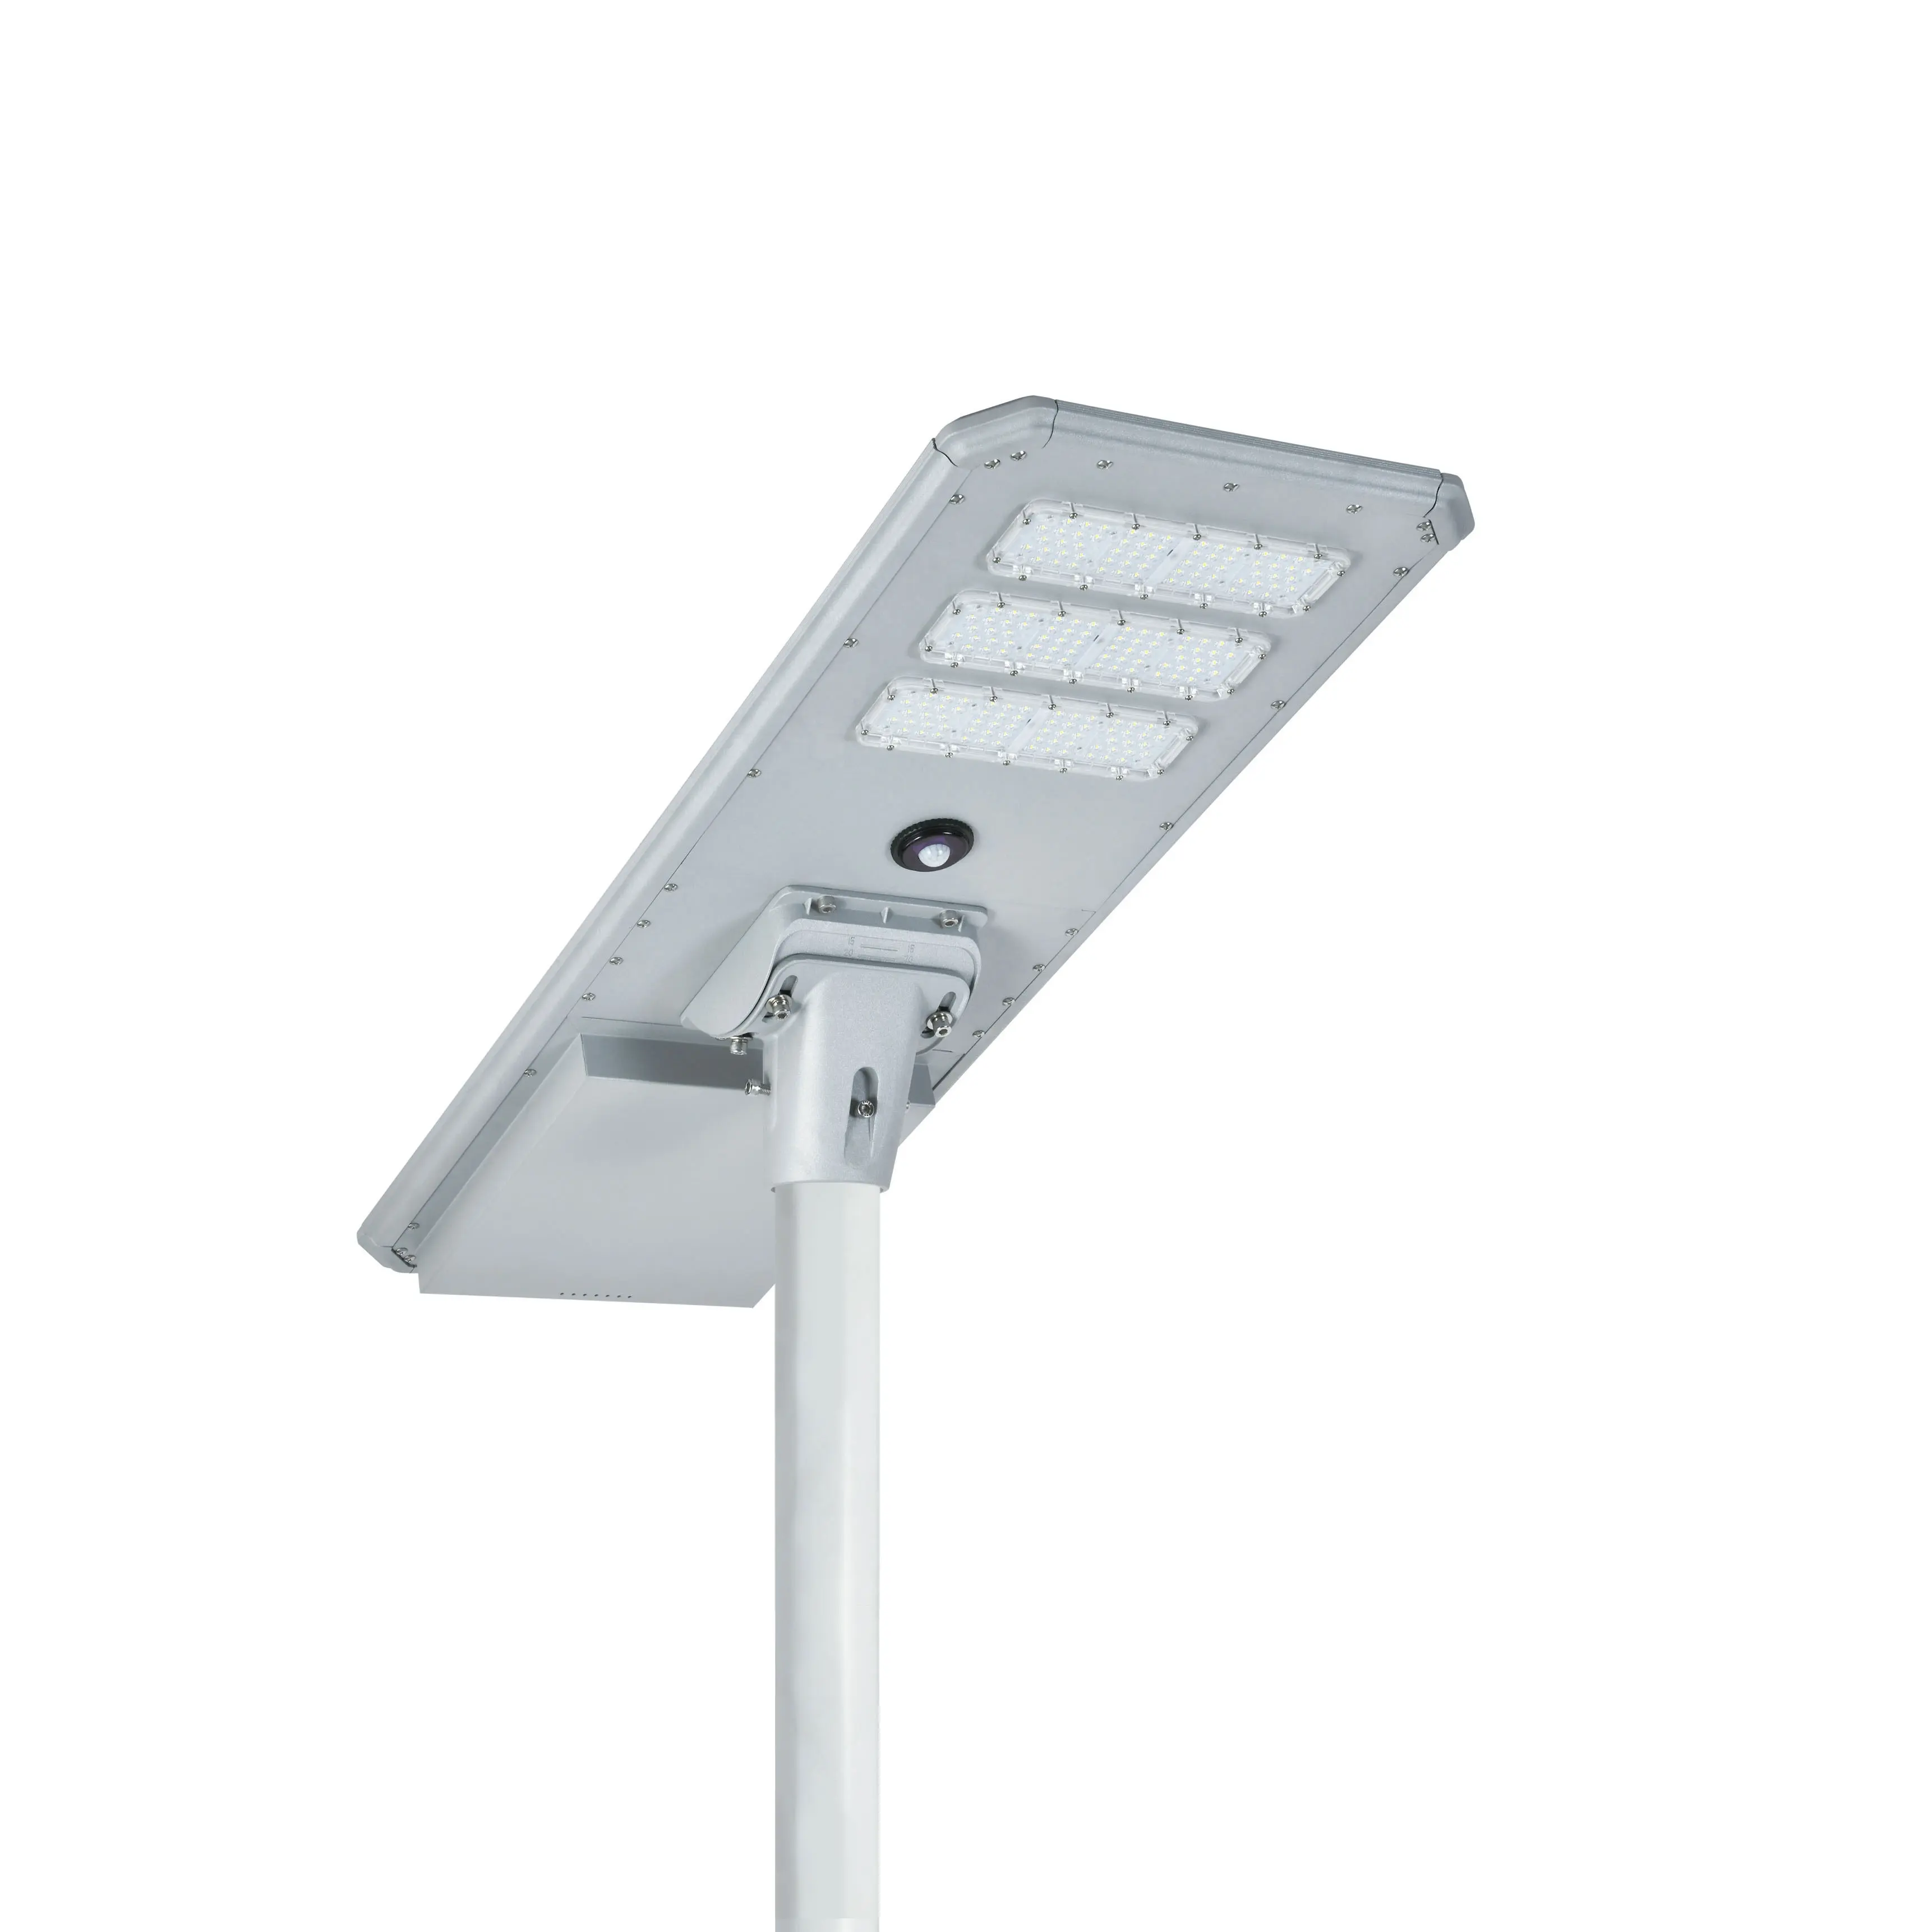 NEW Design All in One Solar Street Light with Solar Panel Off-grid solar Powered Street Light with Lithium Battery